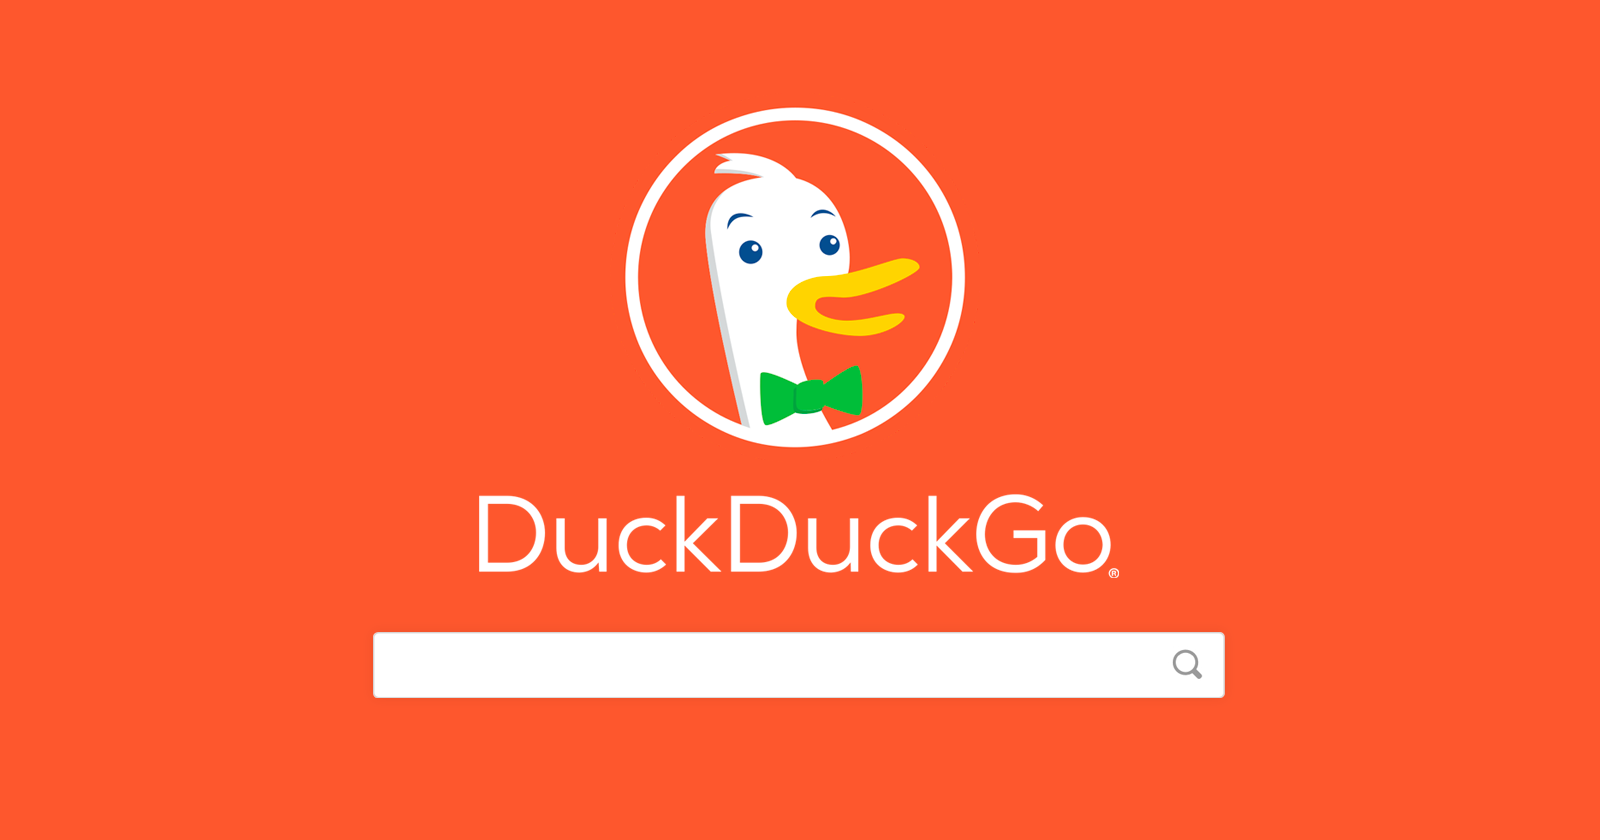 Is DuckDuckGo Safe to Use